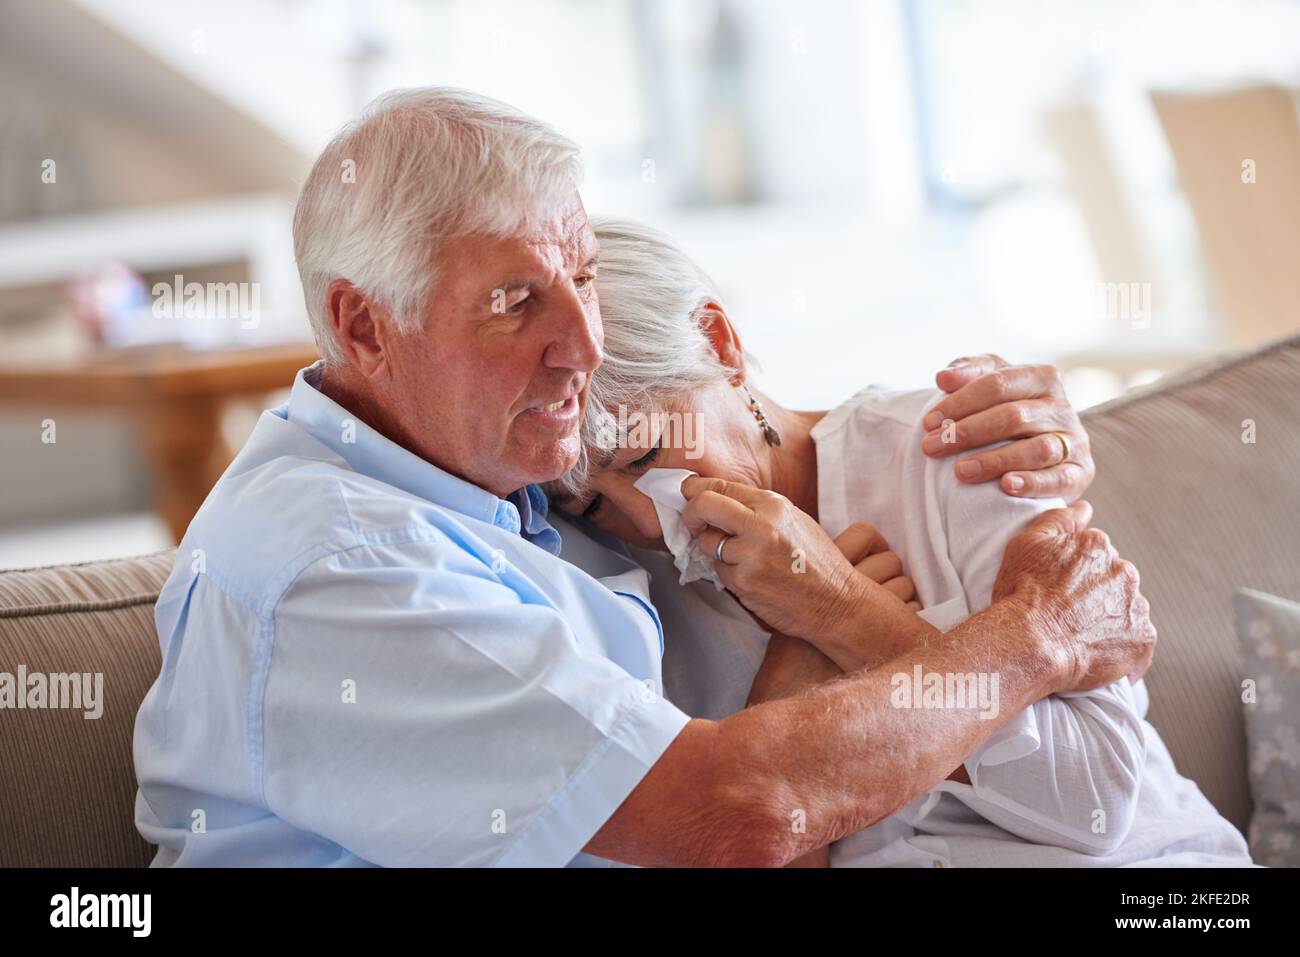 Were going to get through this together. a senior man consoling his wife. Stock Photo